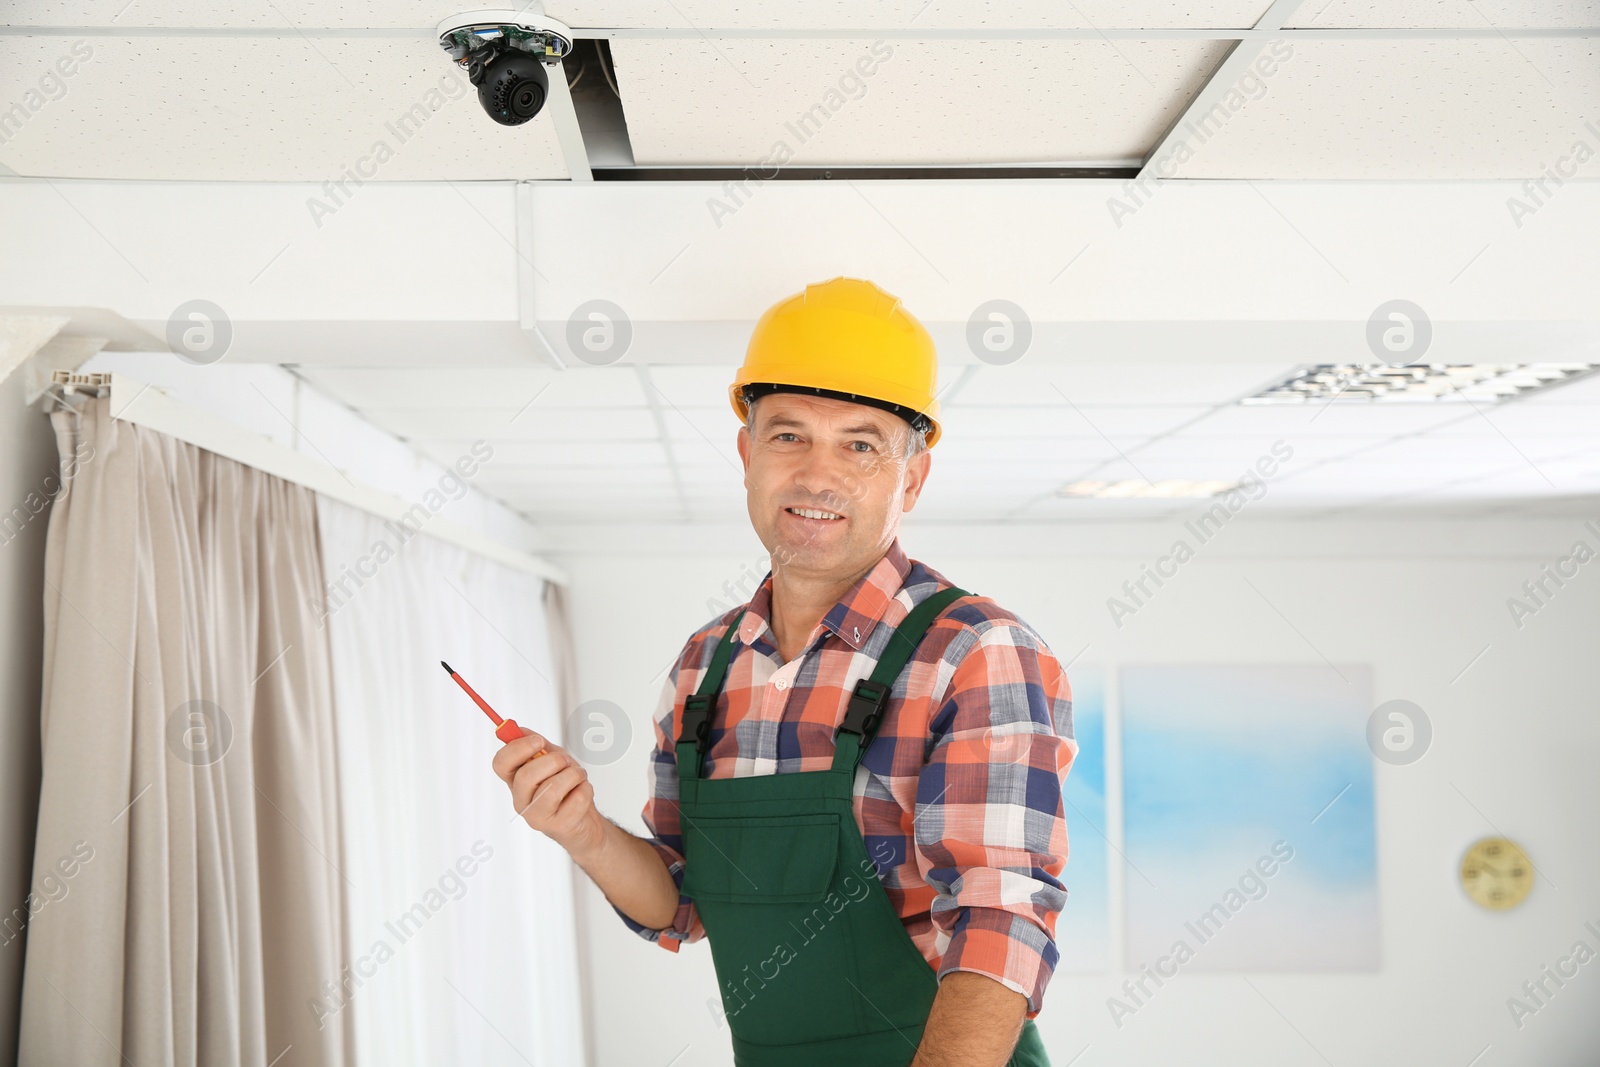 Photo of Electrician with screwdriver repairing CCTV camera indoors